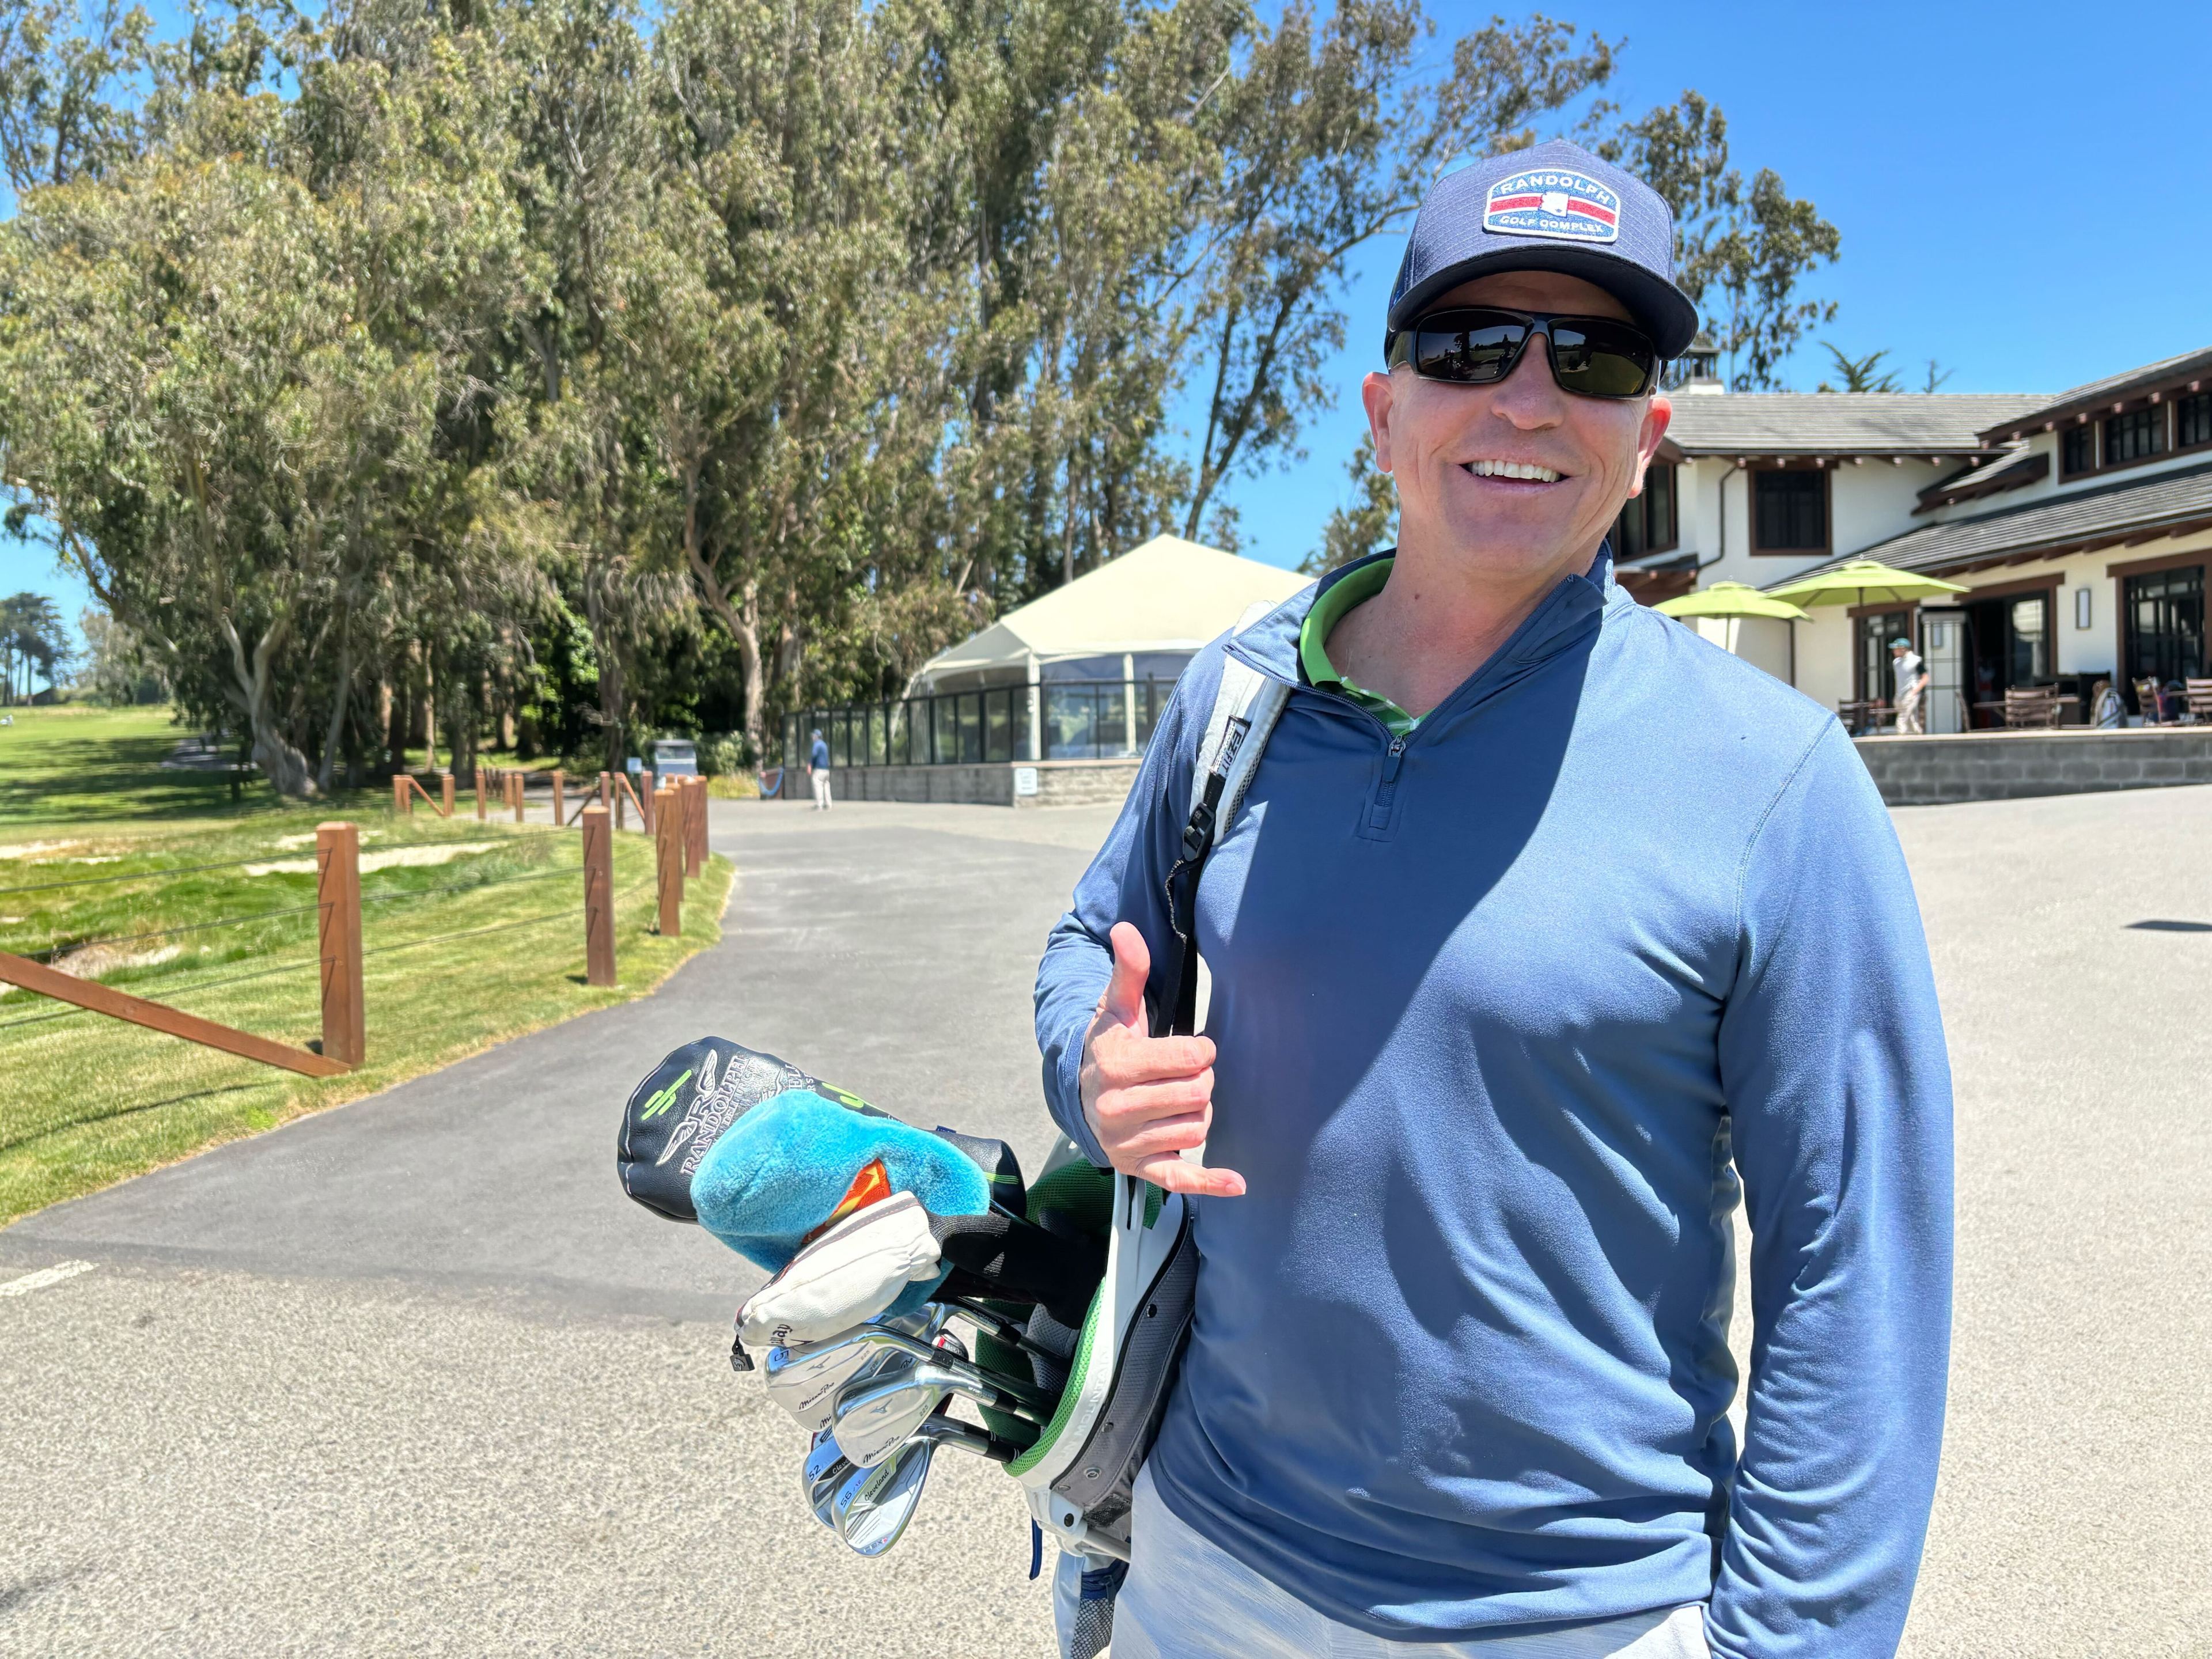 A golfer wearing a hat and sunglasses holds a bag of clubs over his shoulder.